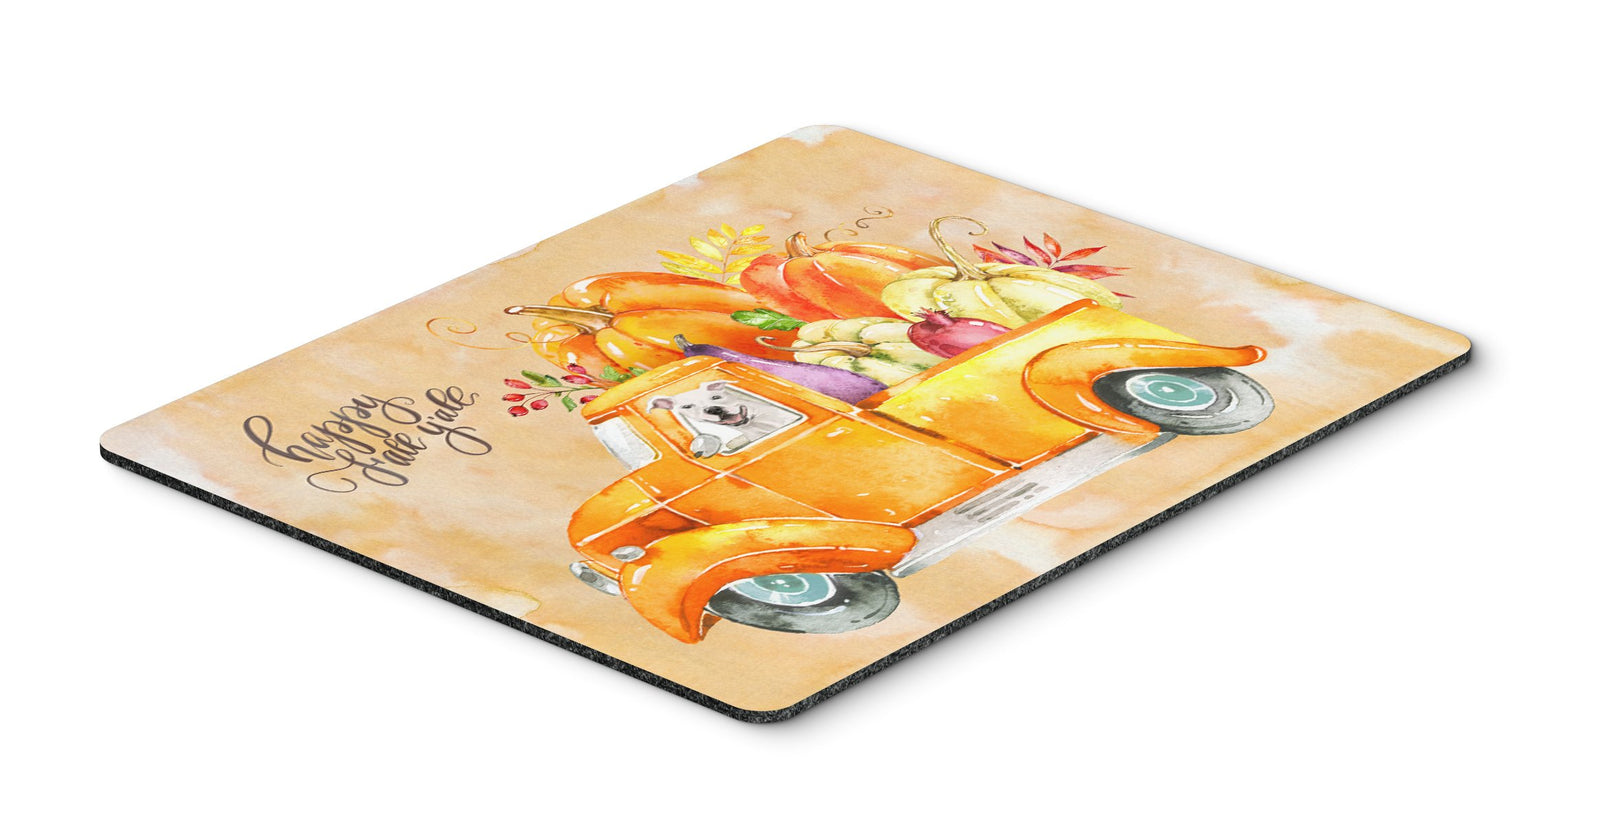 Fall Harvest White Staffordshire Bull Terrier Mouse Pad, Hot Pad or Trivet CK2645MP by Caroline's Treasures